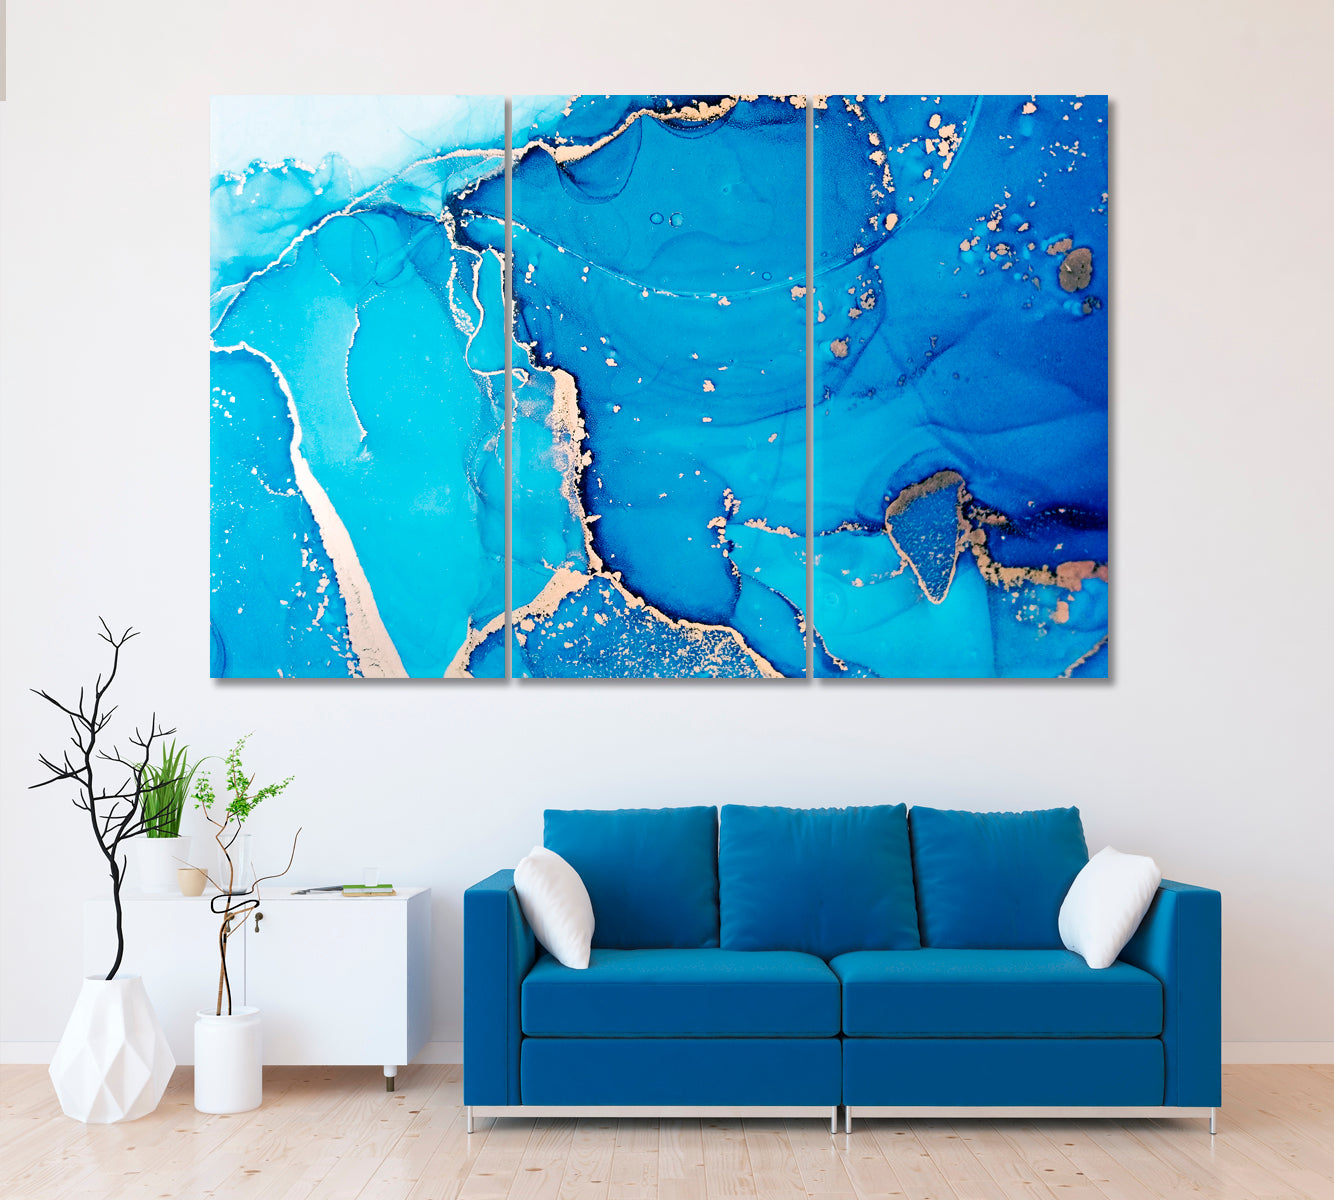 Abstract Blue Mixed Ink Pattern Canvas Print ArtLexy 3 Panels 36"x24" inches 